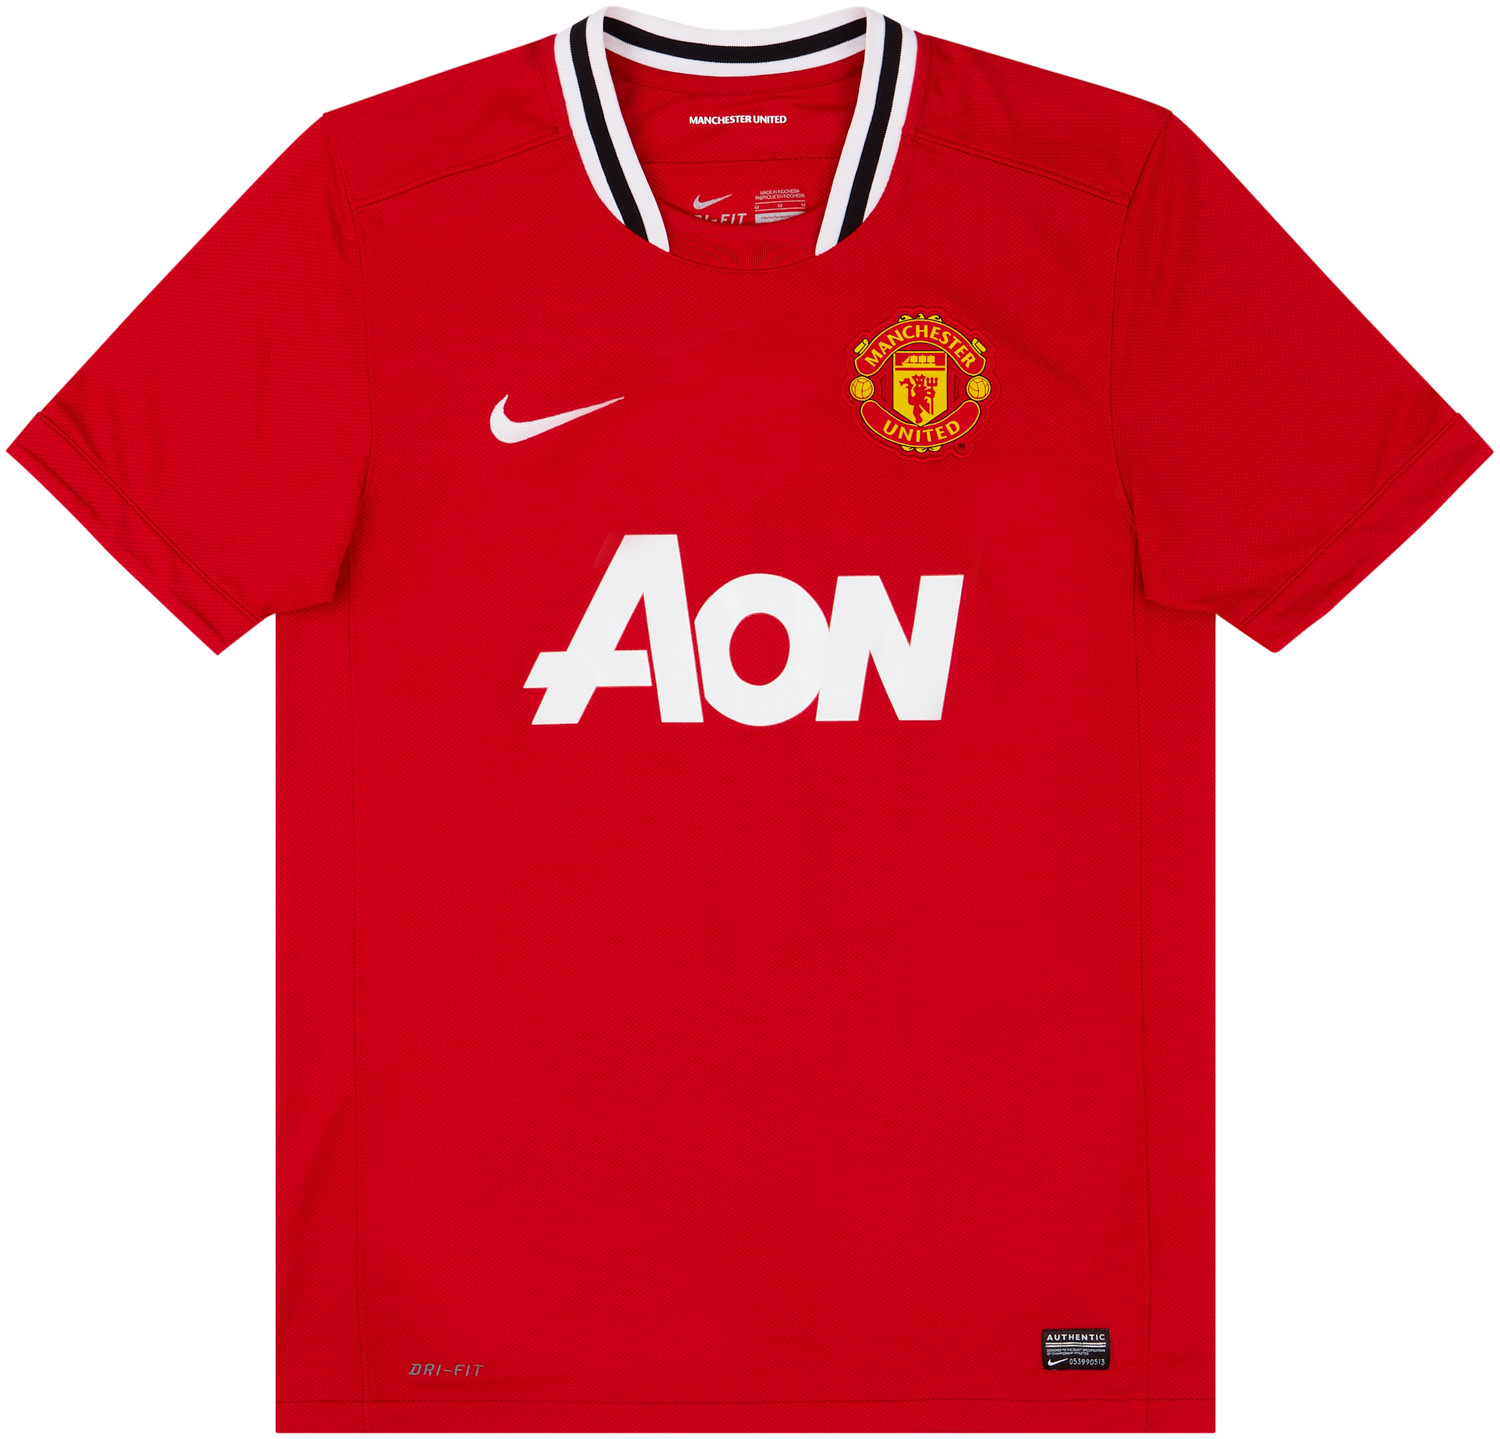 2011-12 Manchester United Home Shirt - 8/10 -